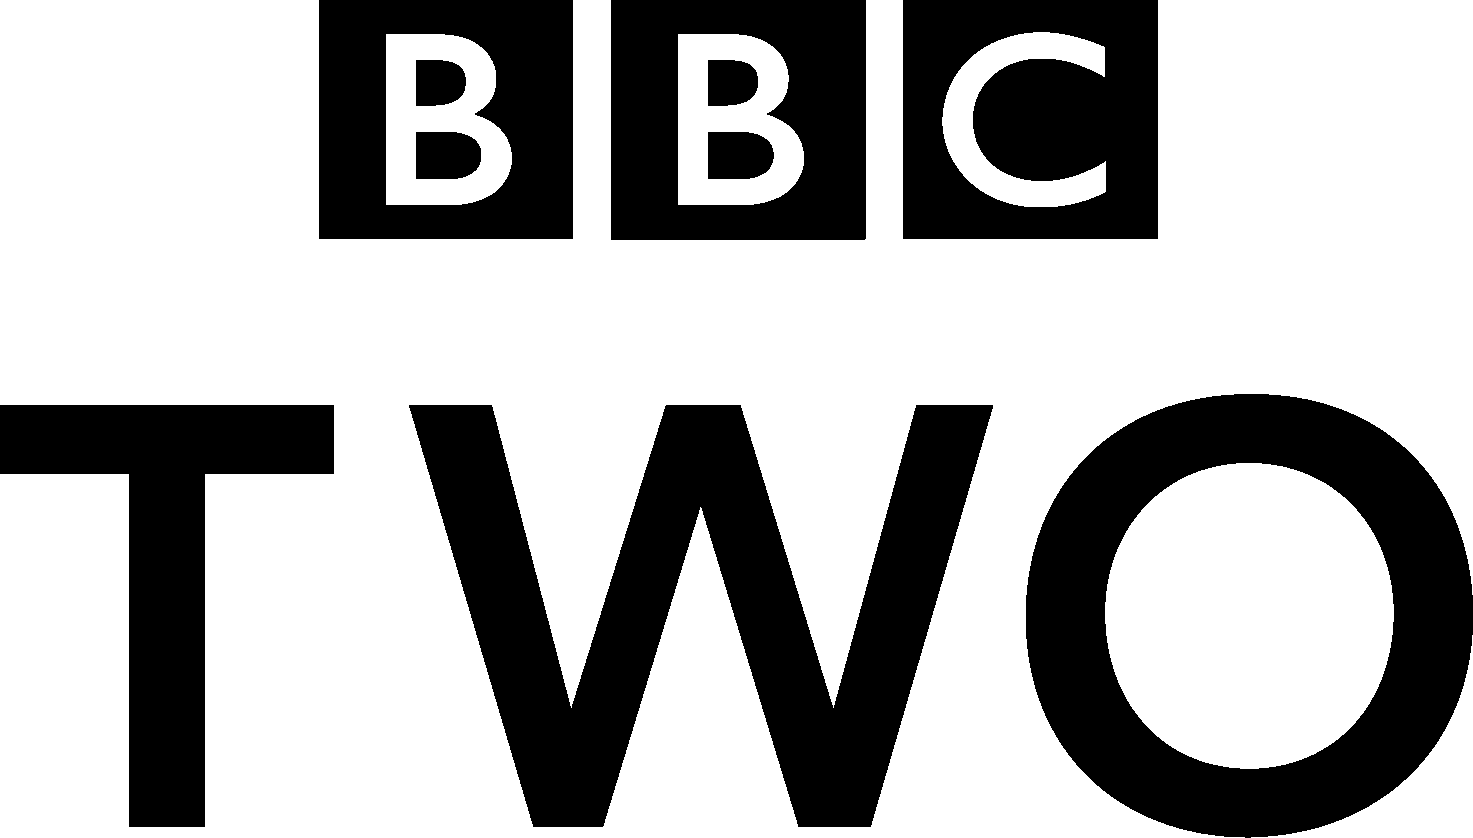 Two Logo - Image - BBC Two square-less logo.png | Logopedia | FANDOM powered by ...